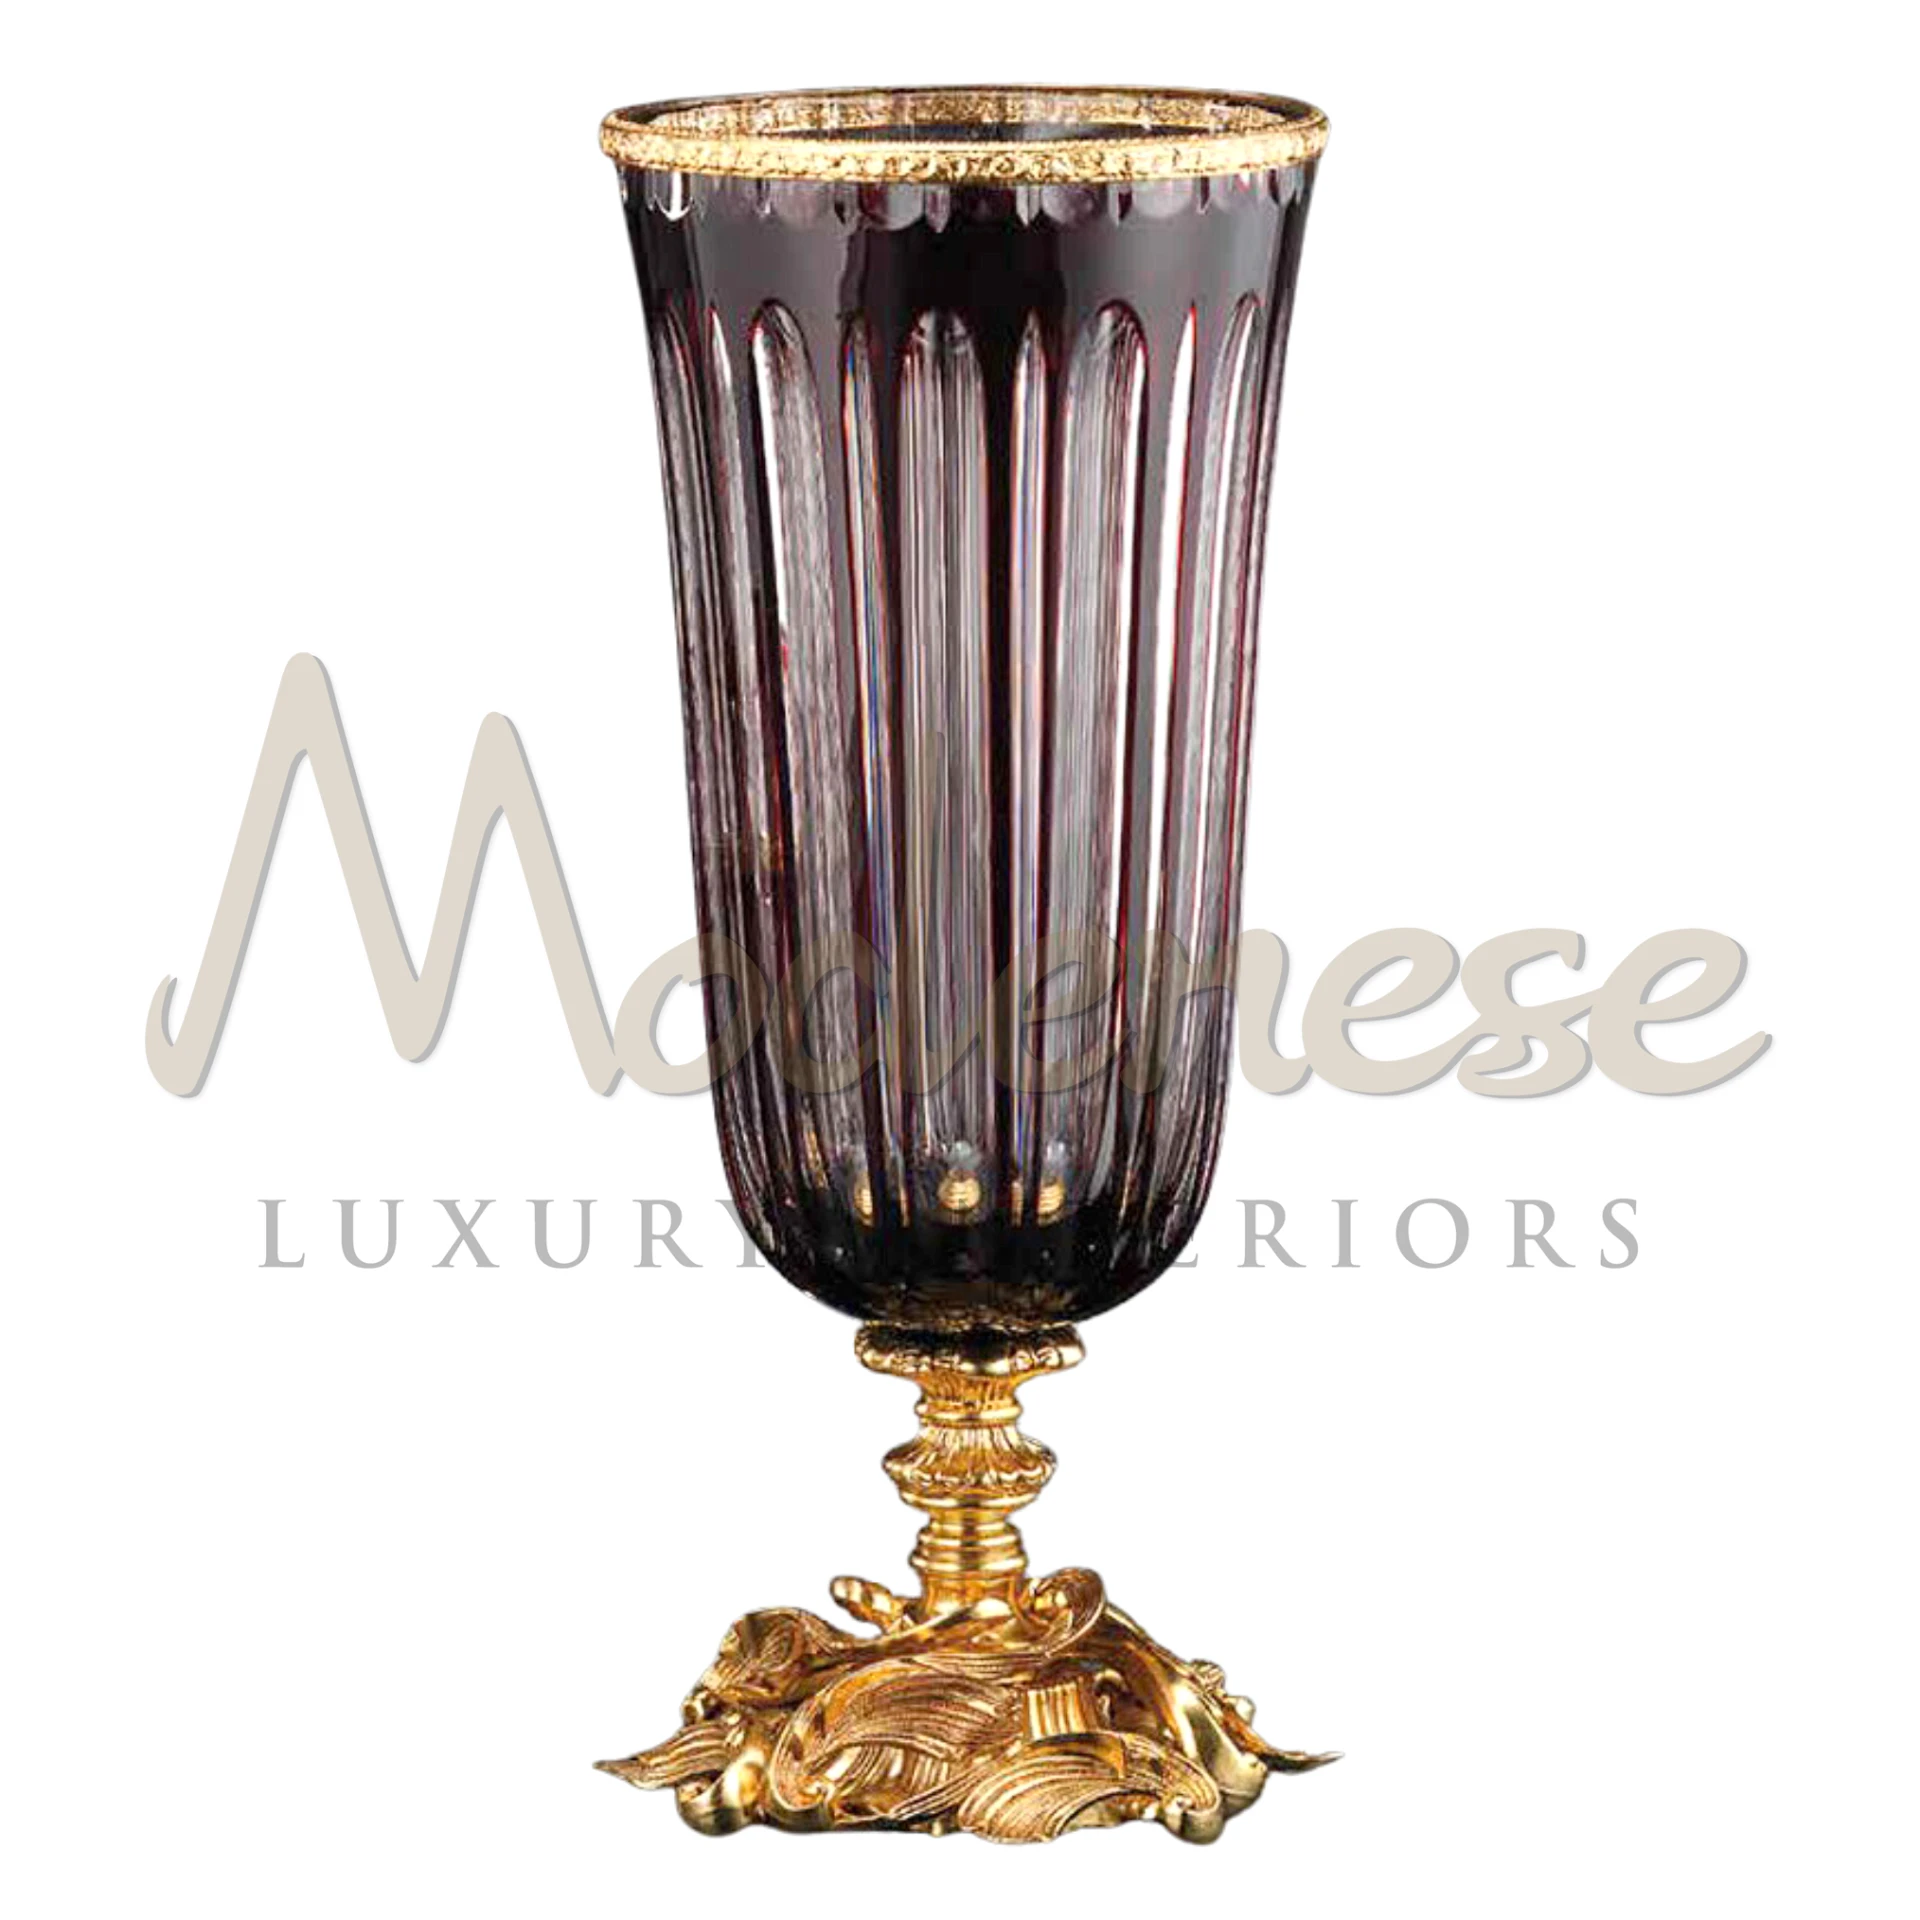 Roccoco Dark Glass Vase, blending 18th-century Rococo elegance with modern luxury, crafted from high-quality glass for a dramatic interior design statement.